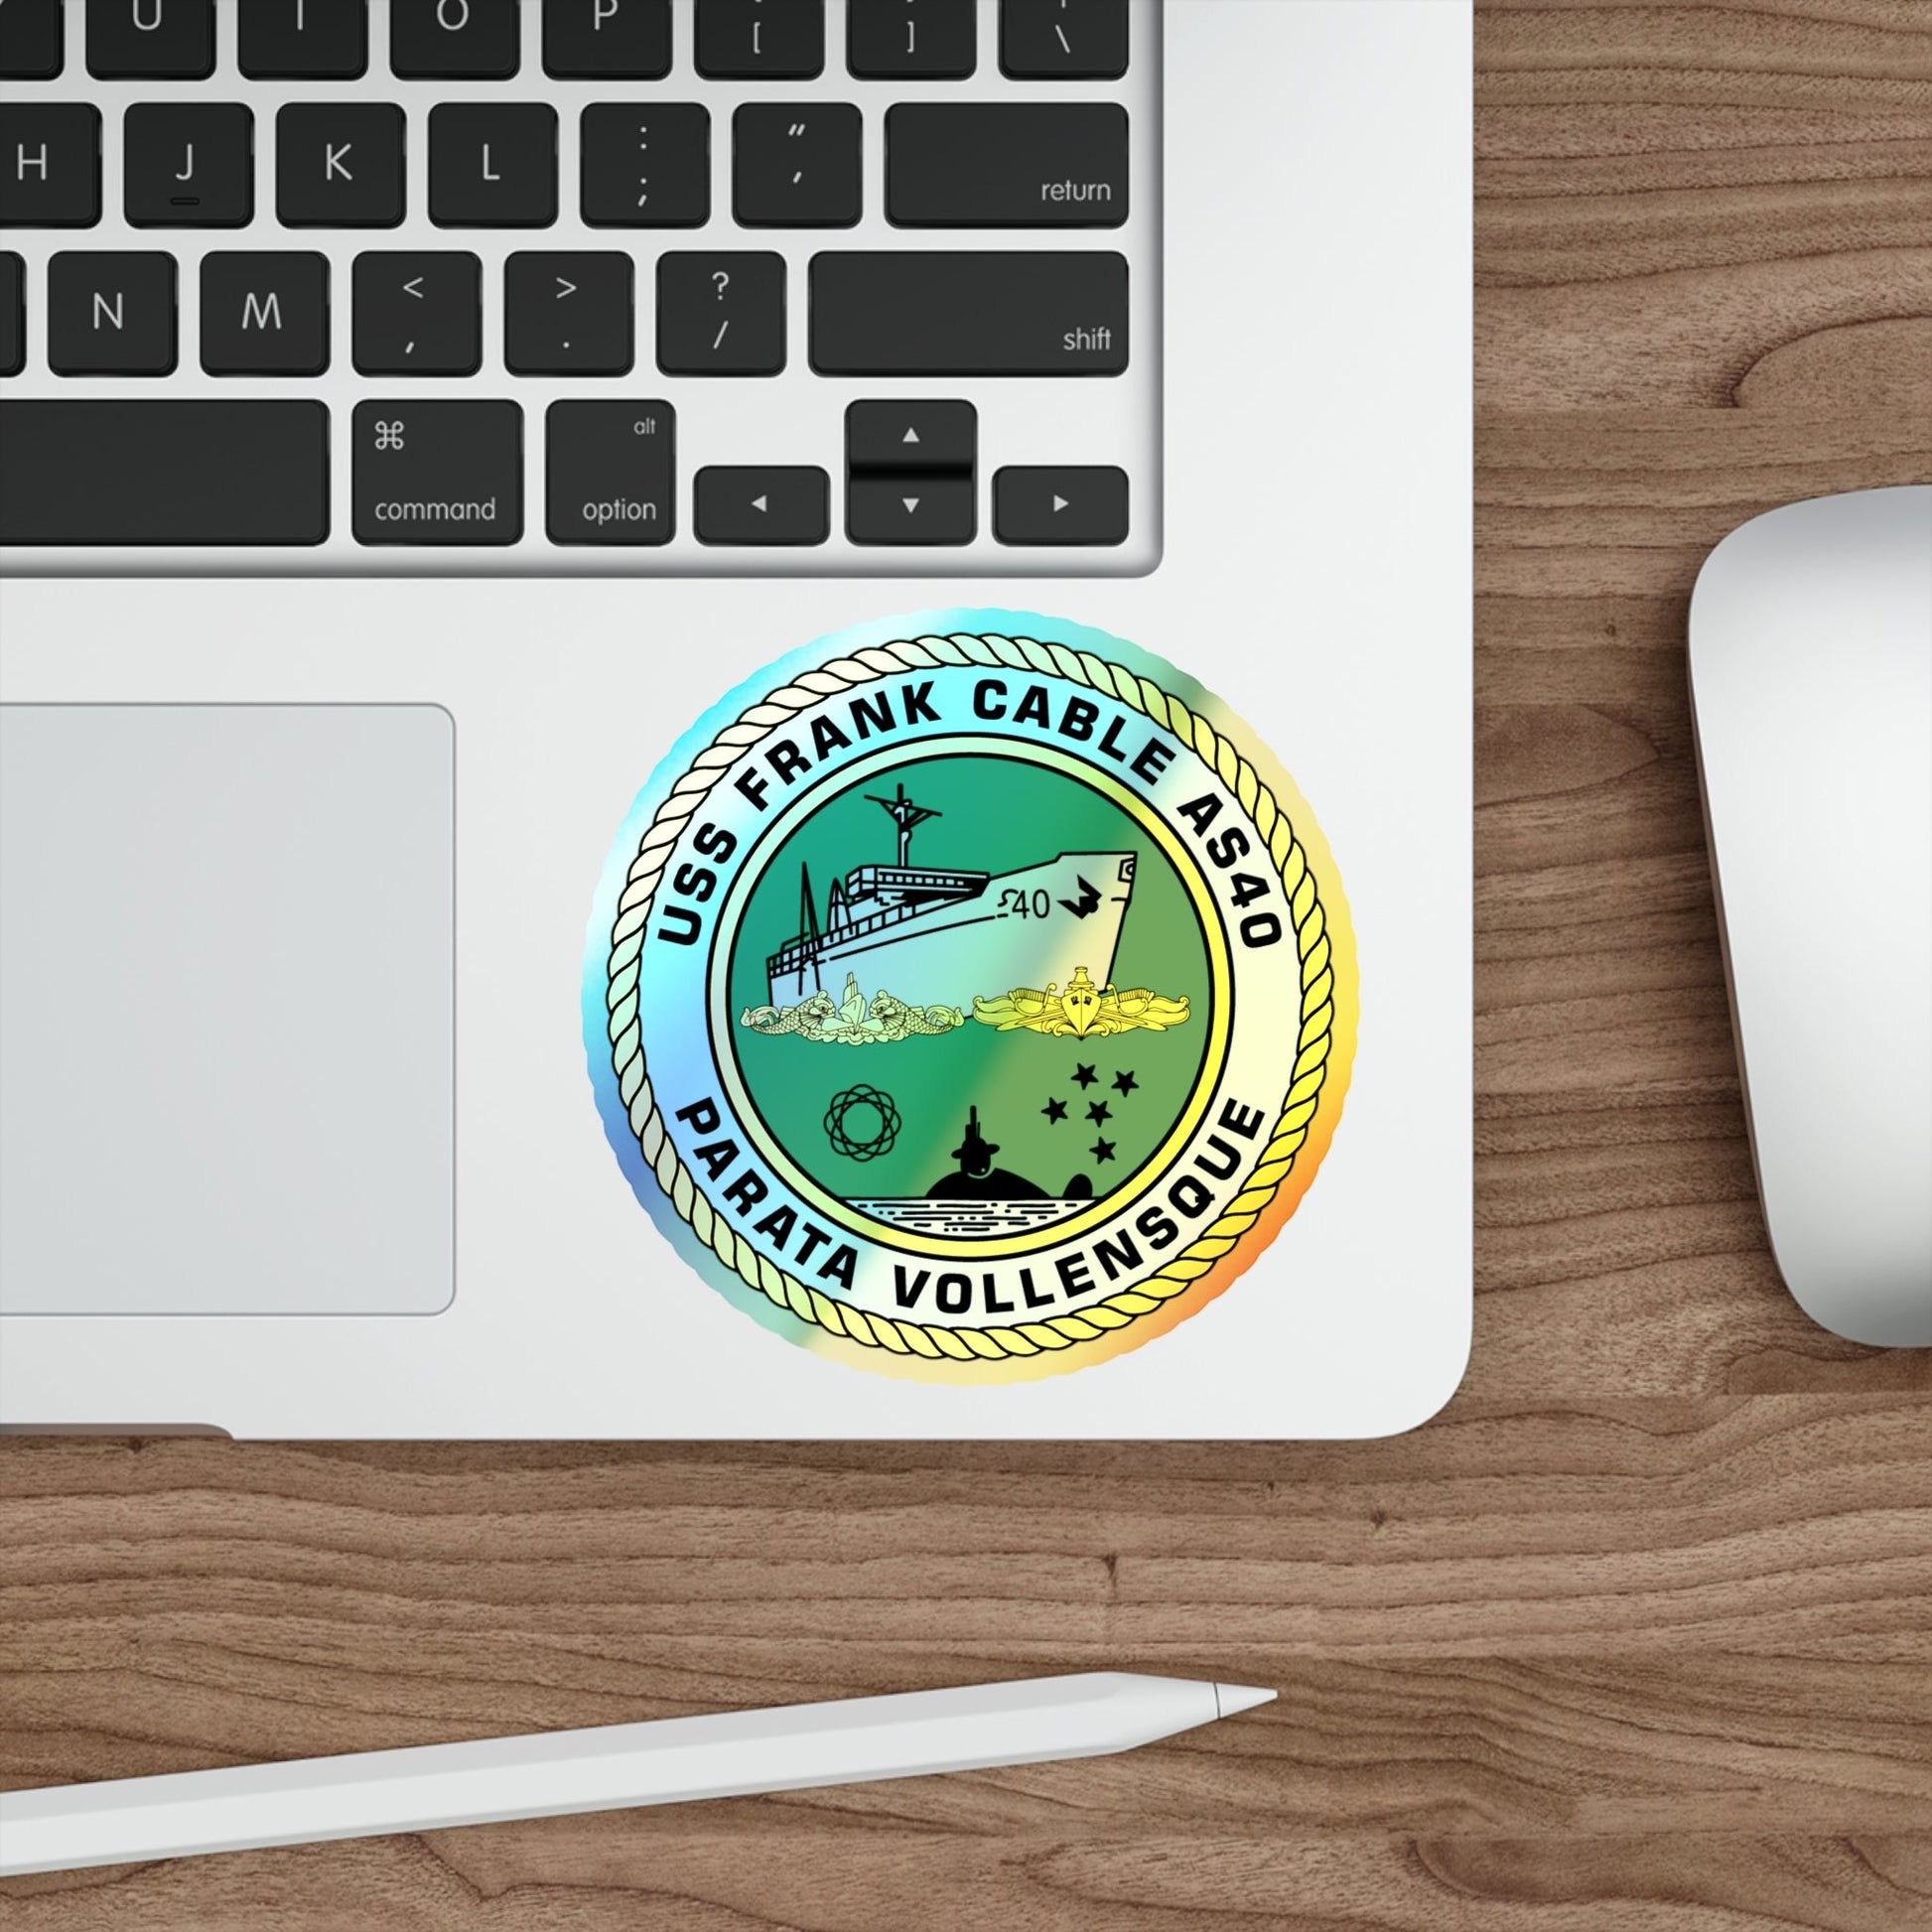 USS Frank Cable AS40 Parata Vollensque (U.S. Navy) Holographic STICKER Die-Cut Vinyl Decal-The Sticker Space